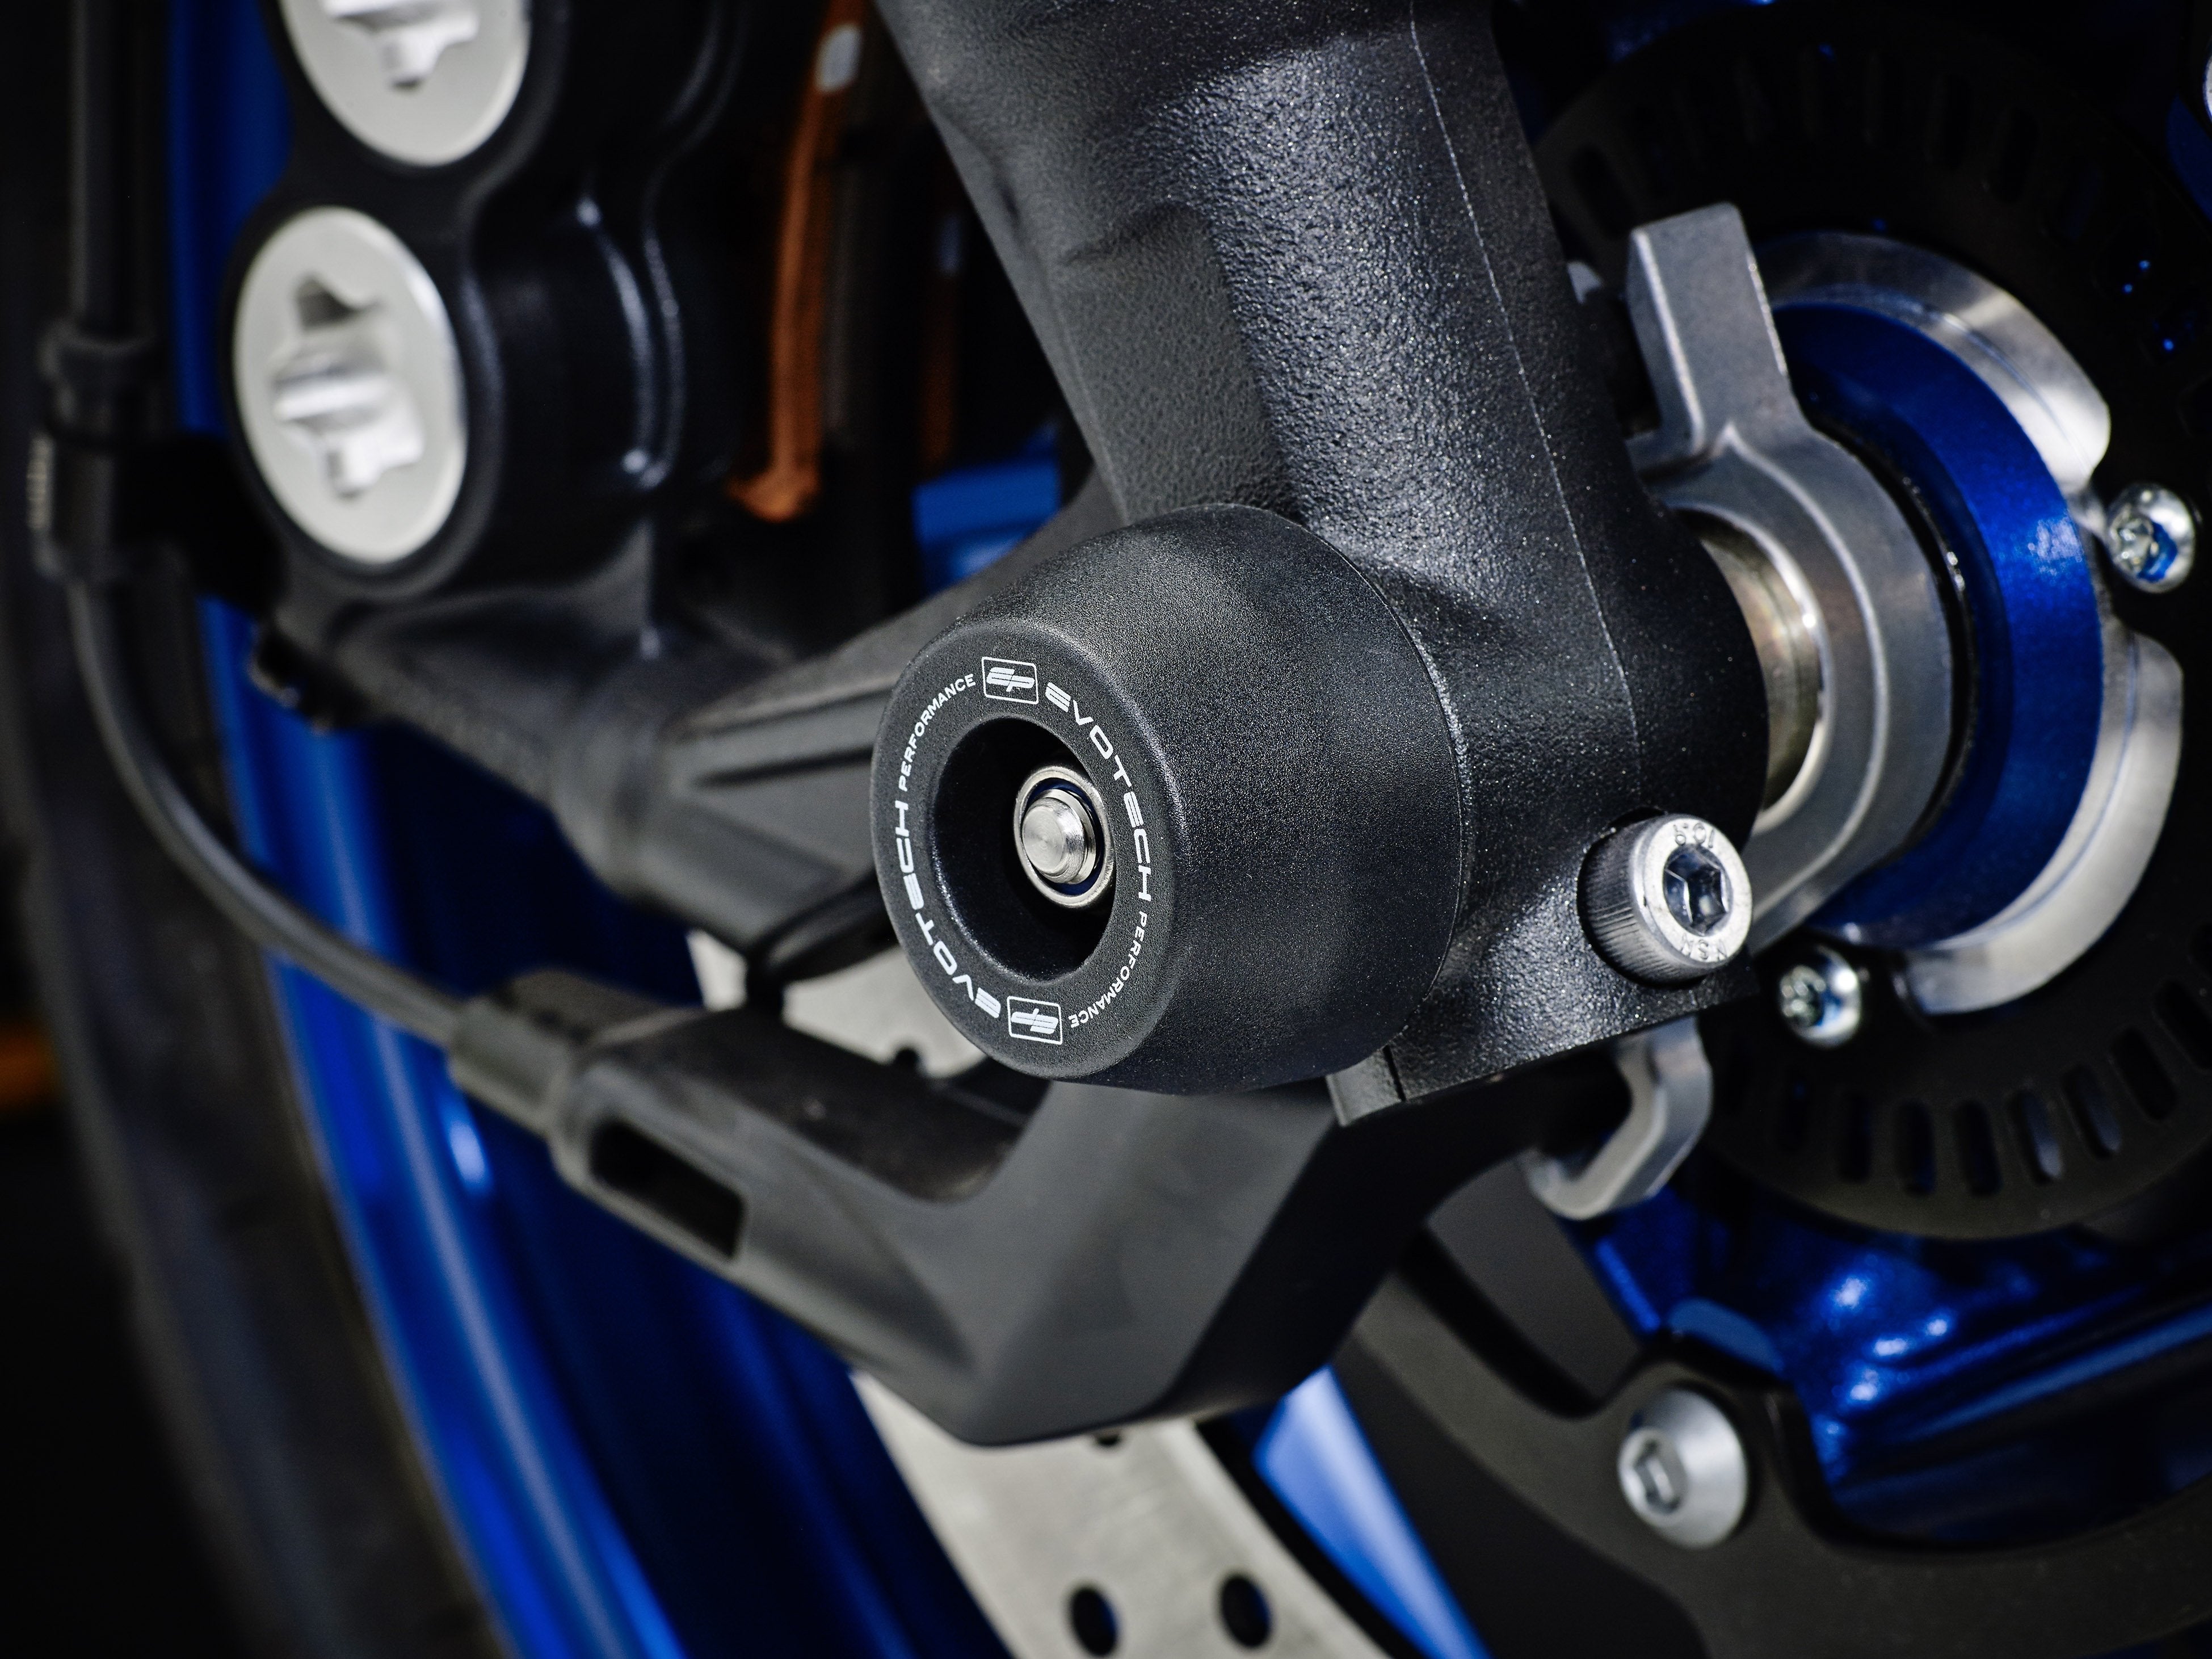 EP Spindle Bobbins Kit for the Yamaha Tracer 9 GT fitted to the front wheel, protecting the front forks and brake calipers.